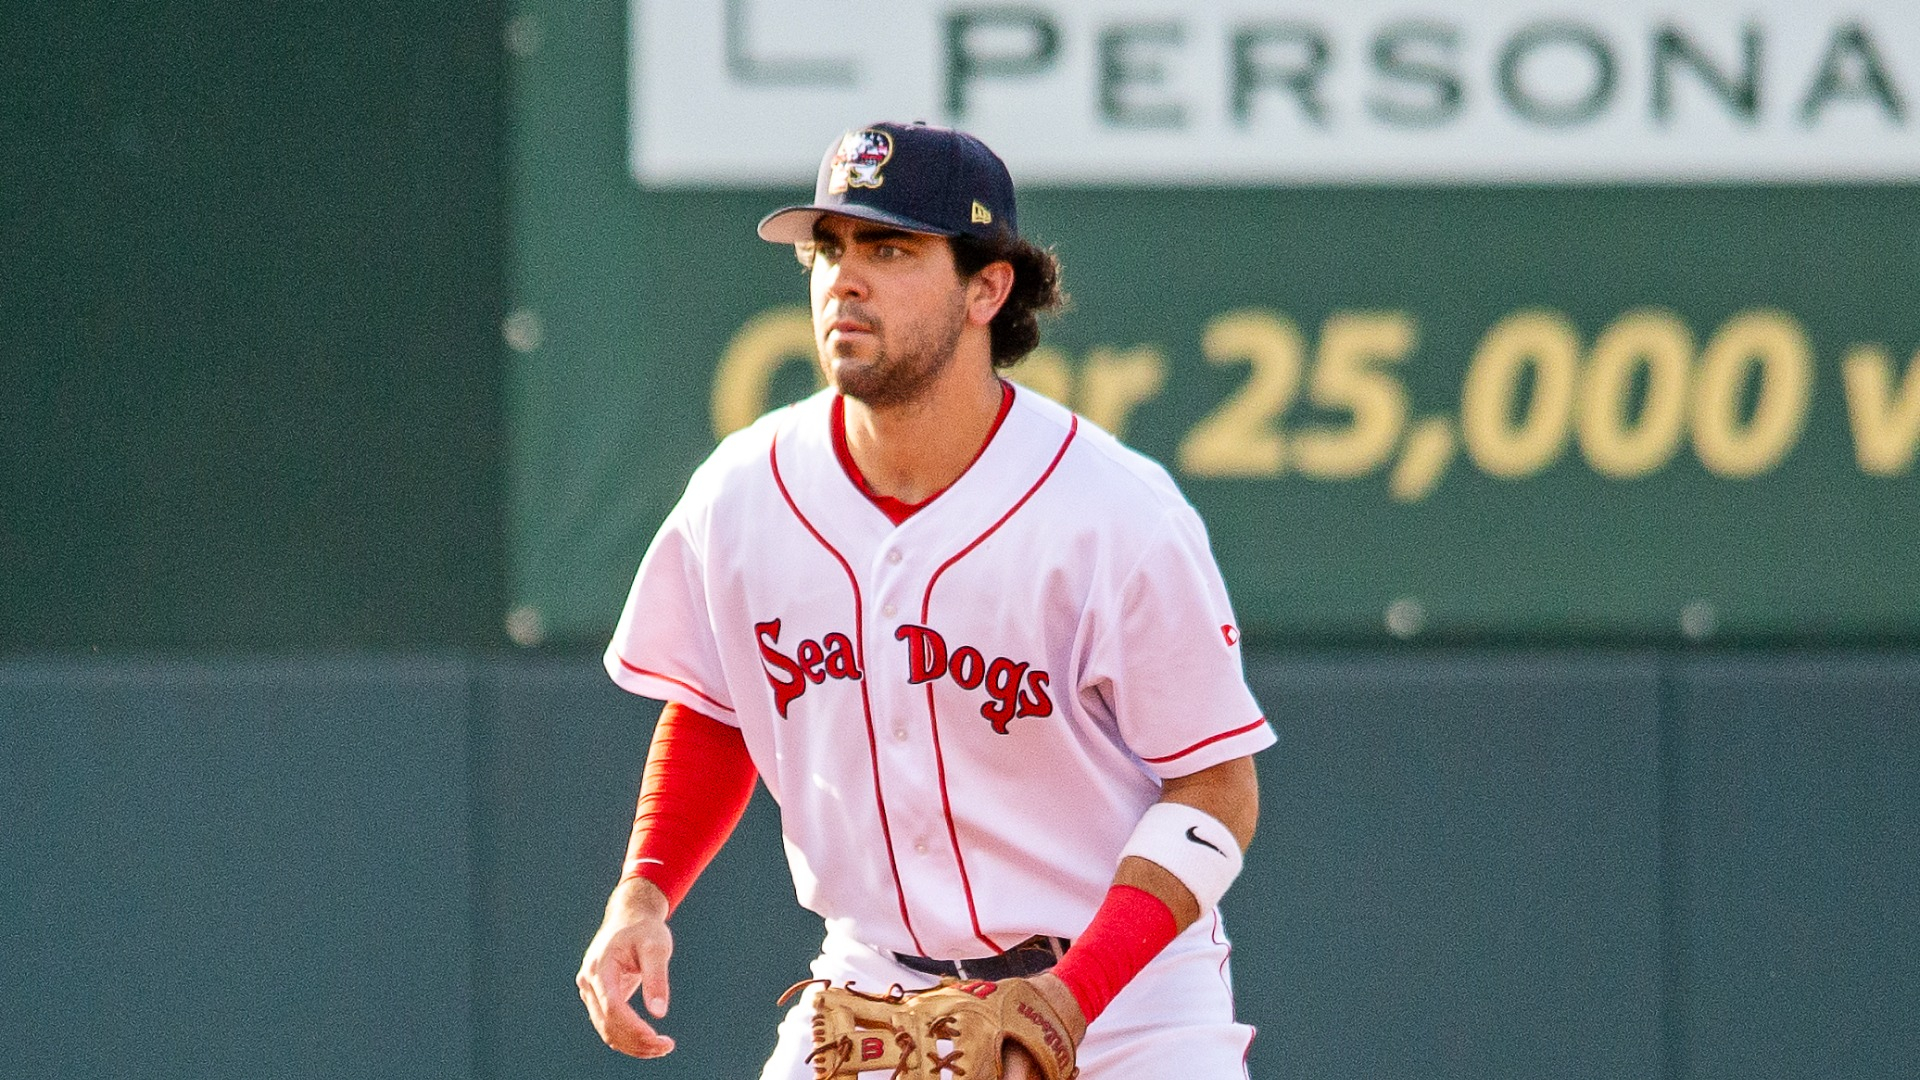 5 things to know about Red Sox shortstop Marcelo Mayer